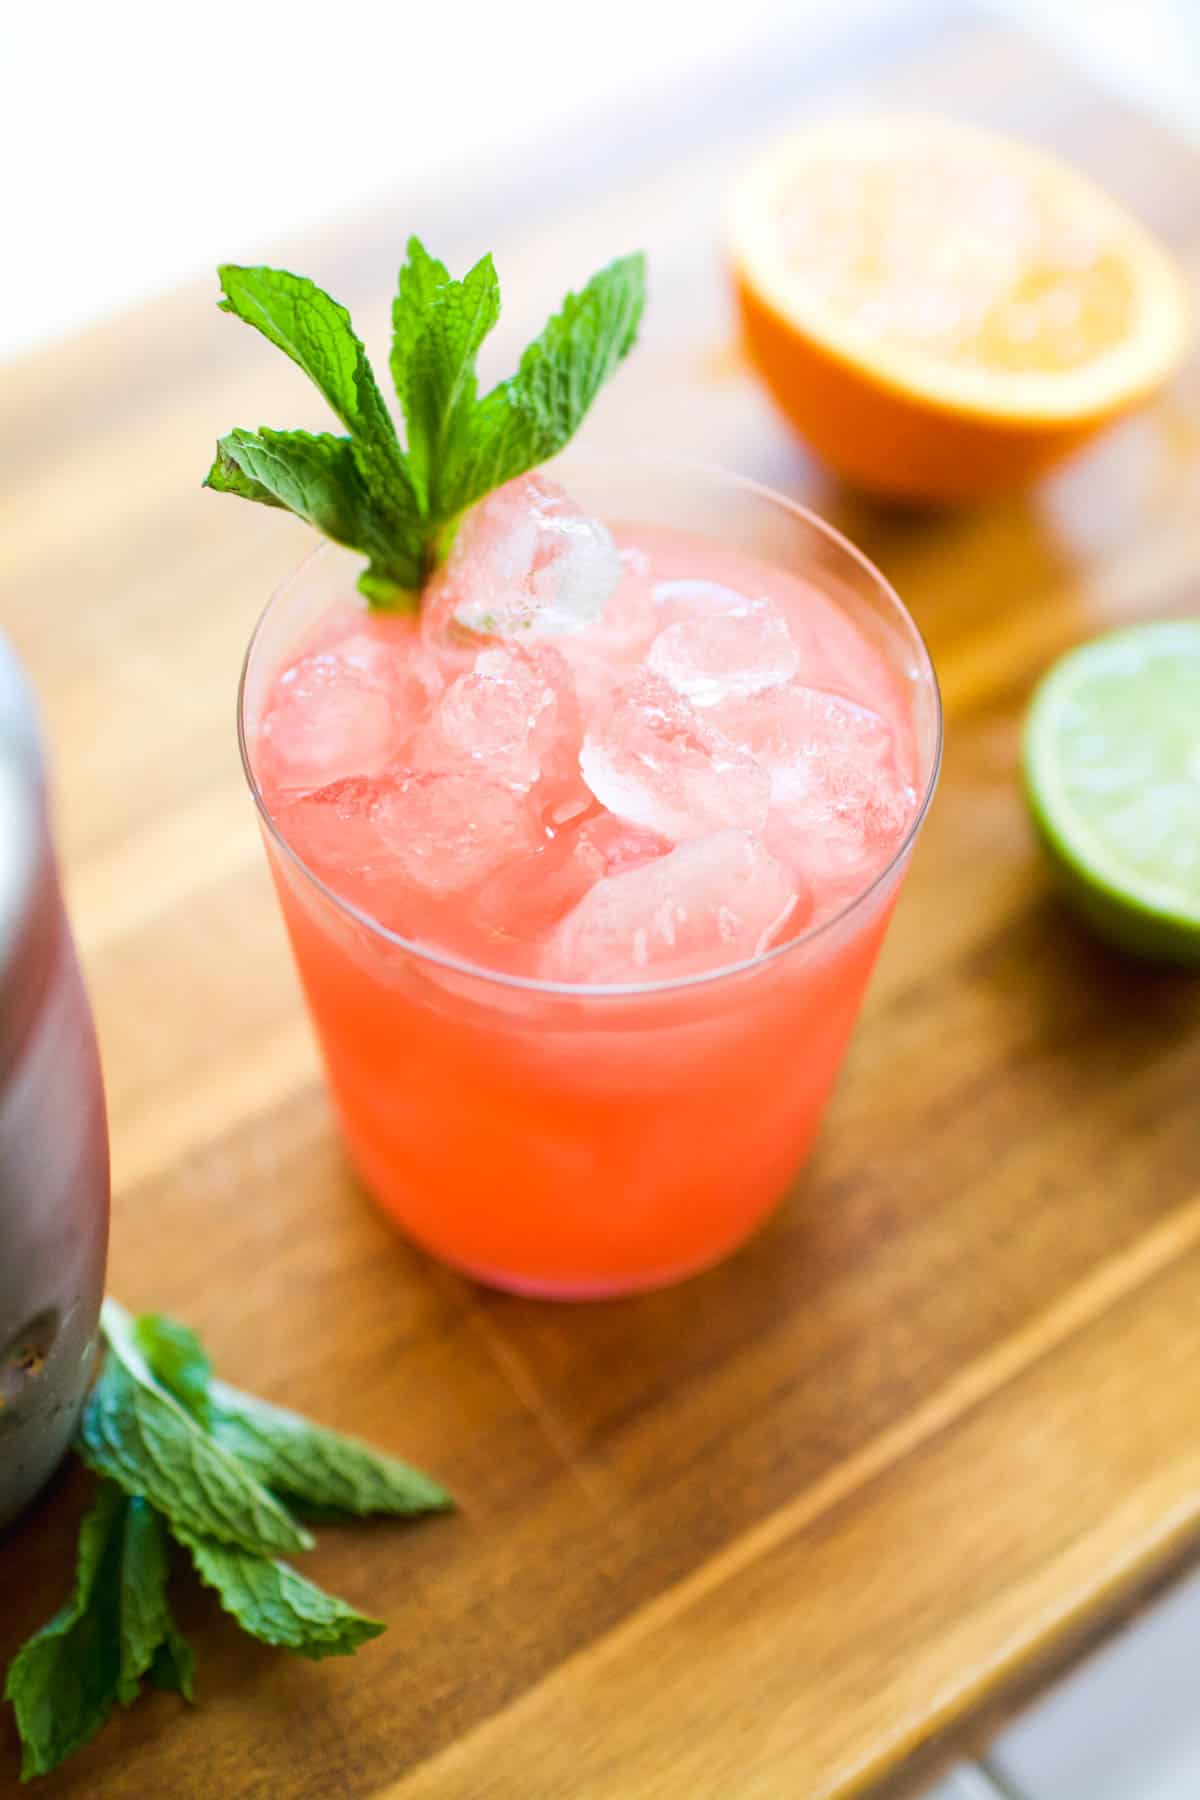 A pink cocktail with mint garnish on a cutting board next to cut citrus.